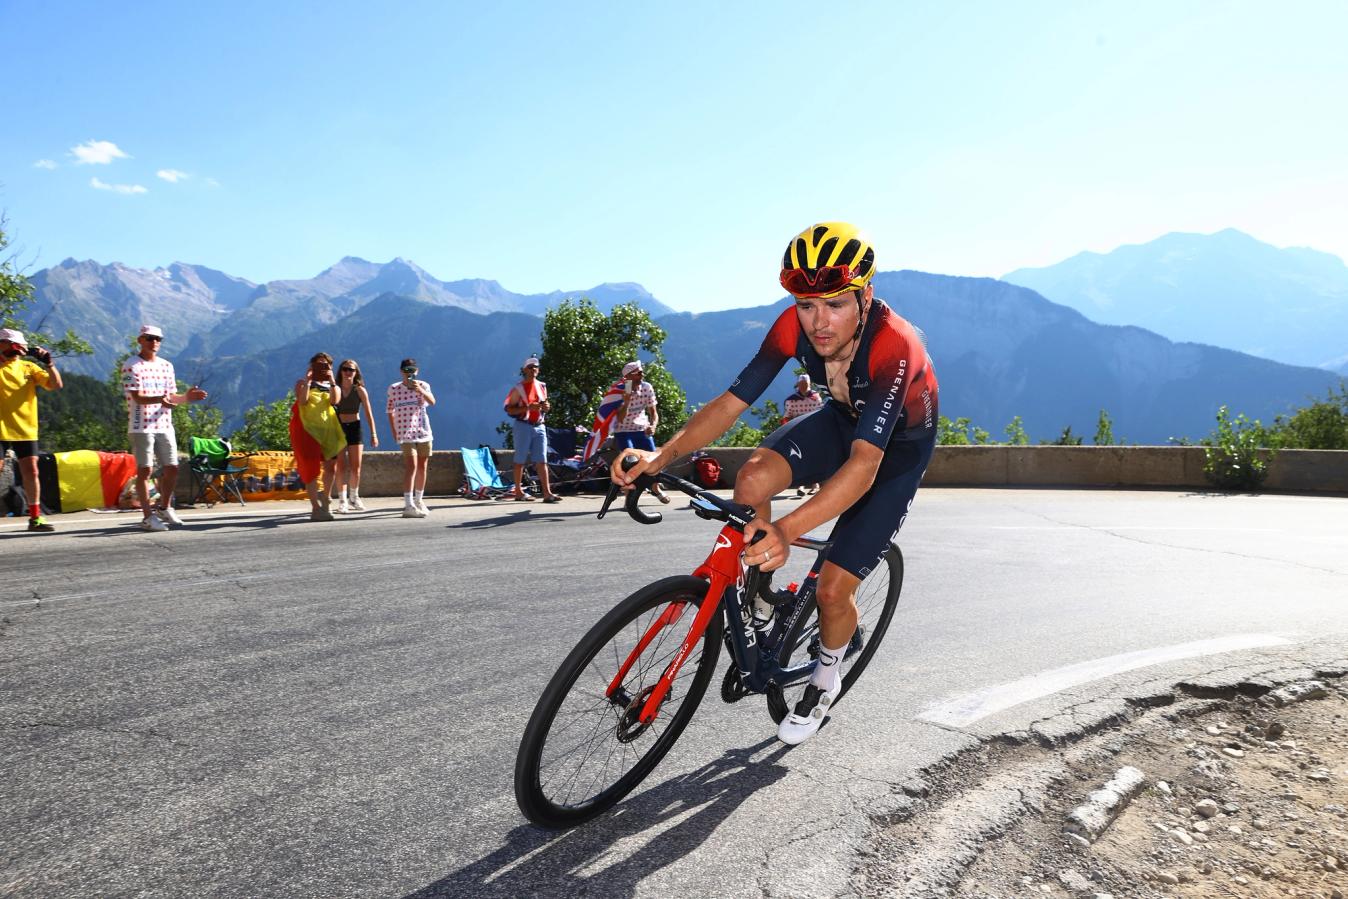 Alpe d'Huez is famous for its 21 hairpins that when last used saw Tom Pidock take an emphatic solo stage win